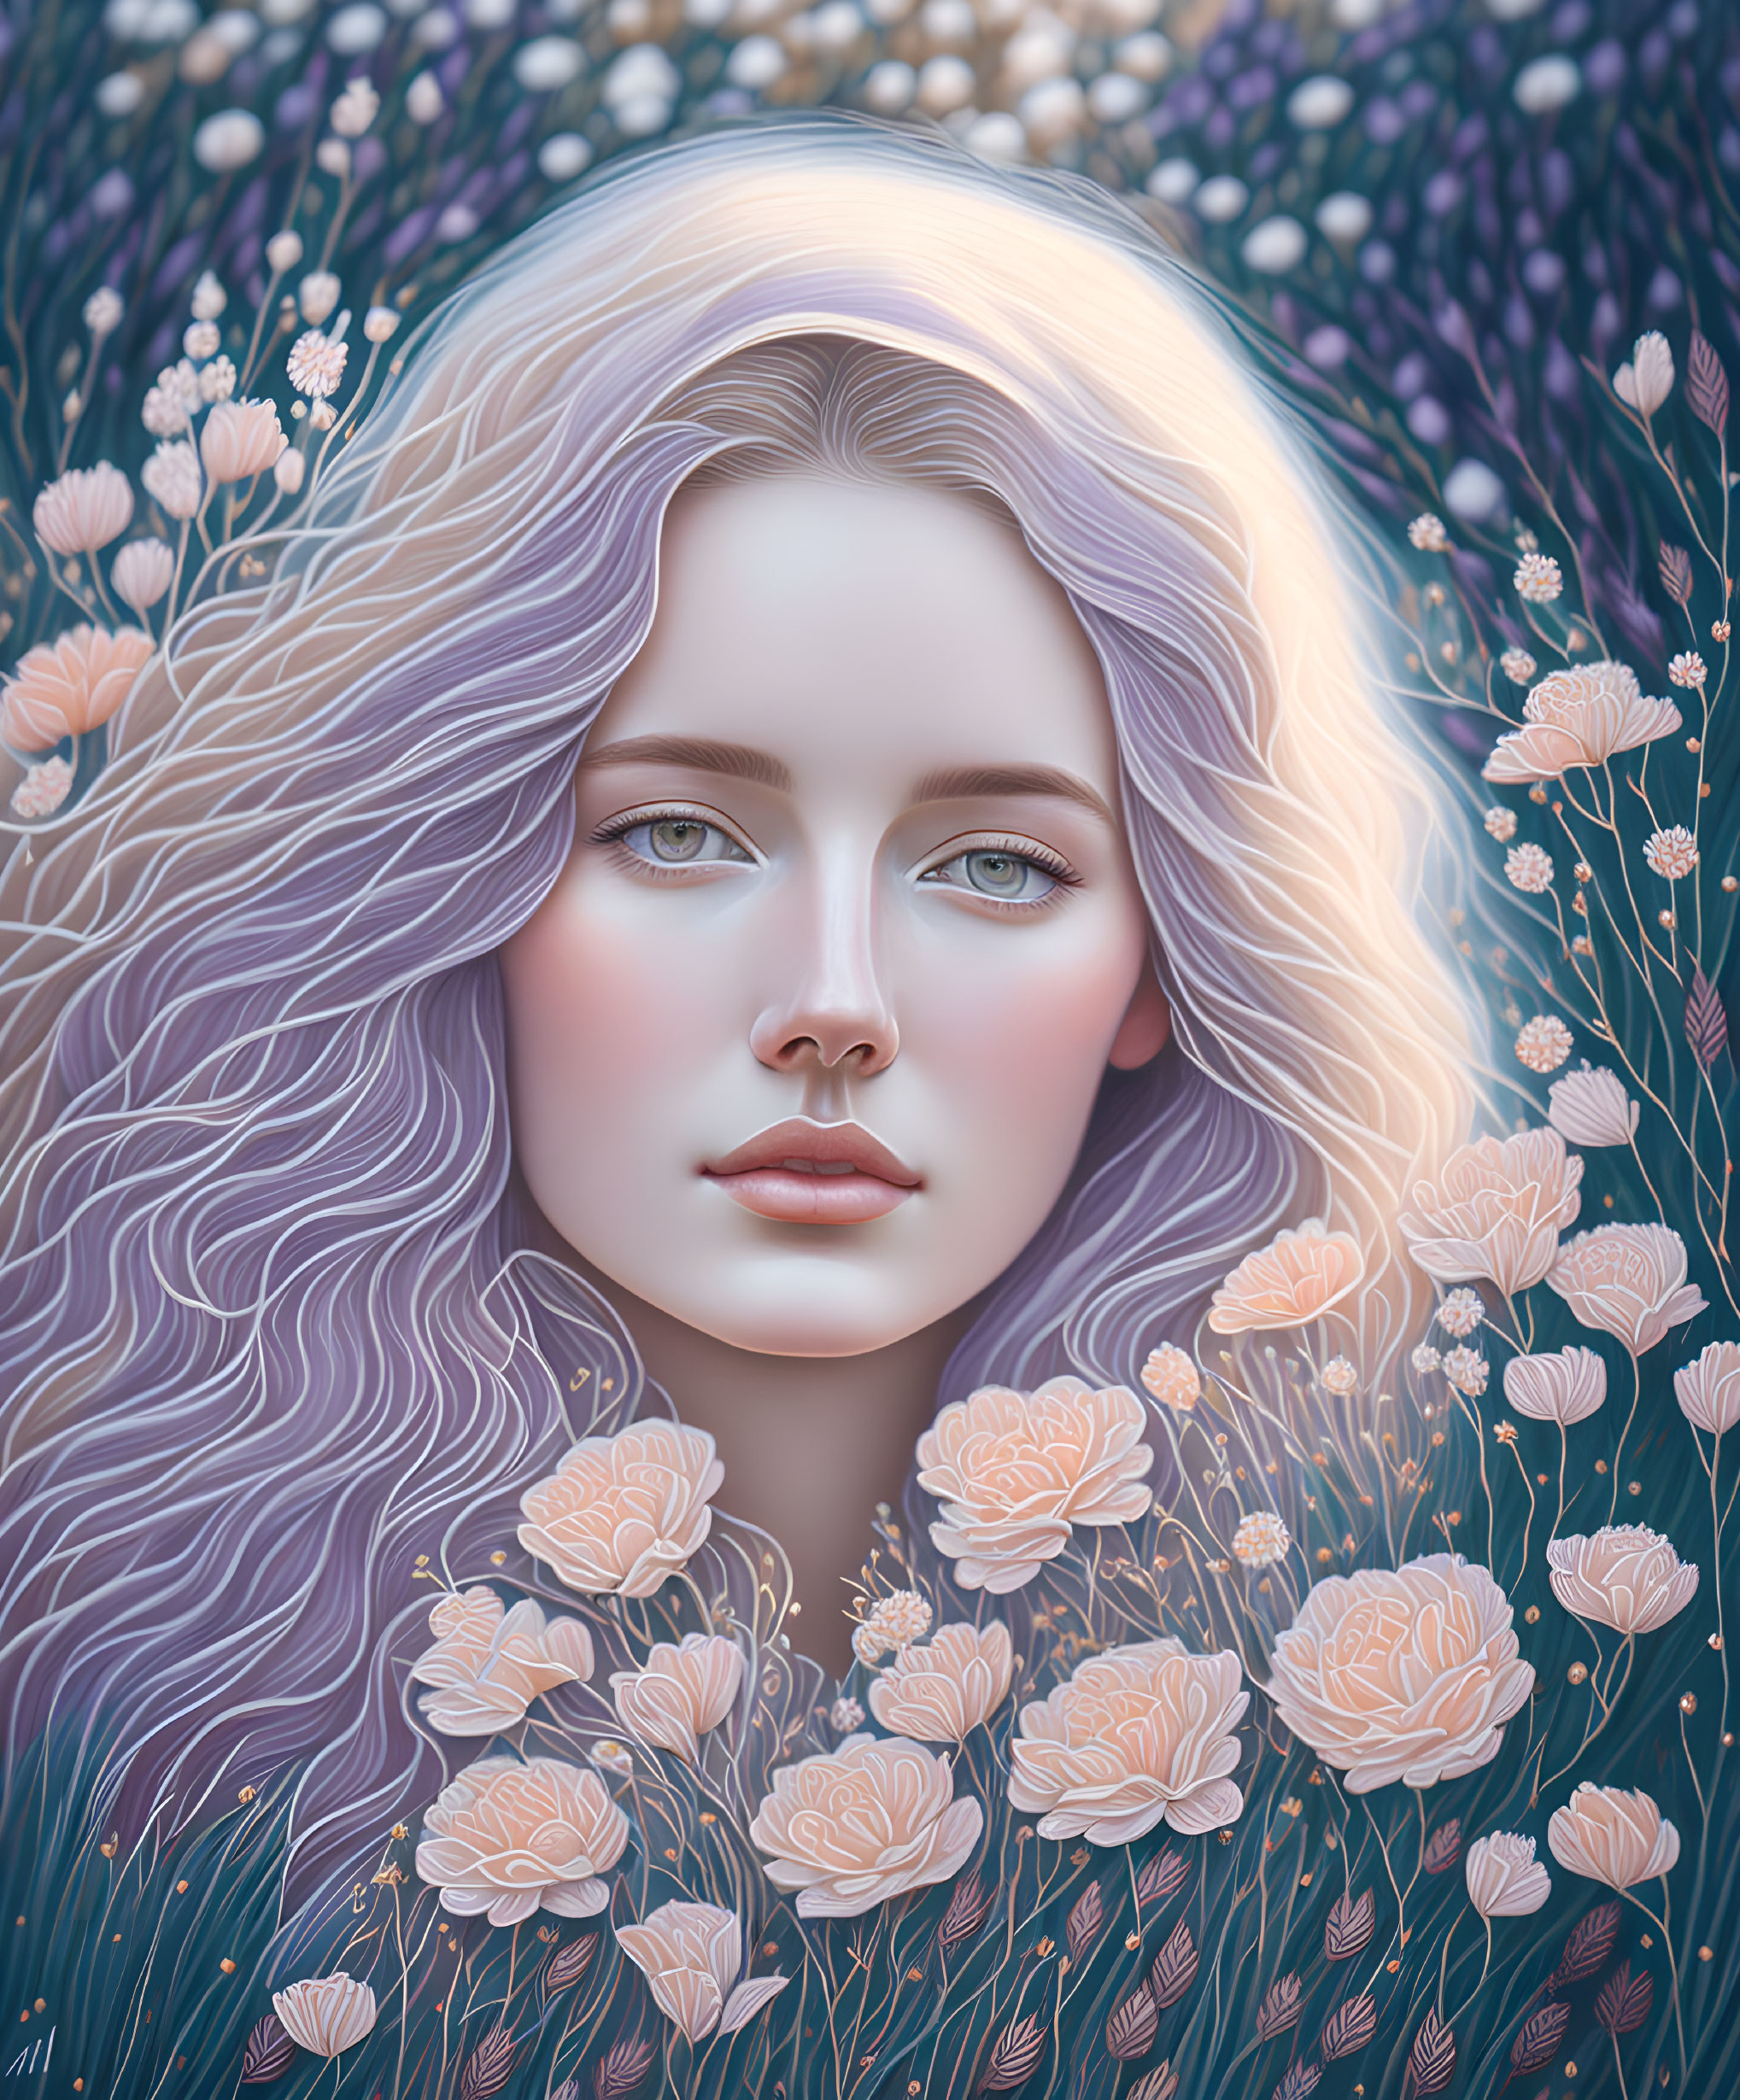 Illustration: Woman with long purple hair in pastel flower setting